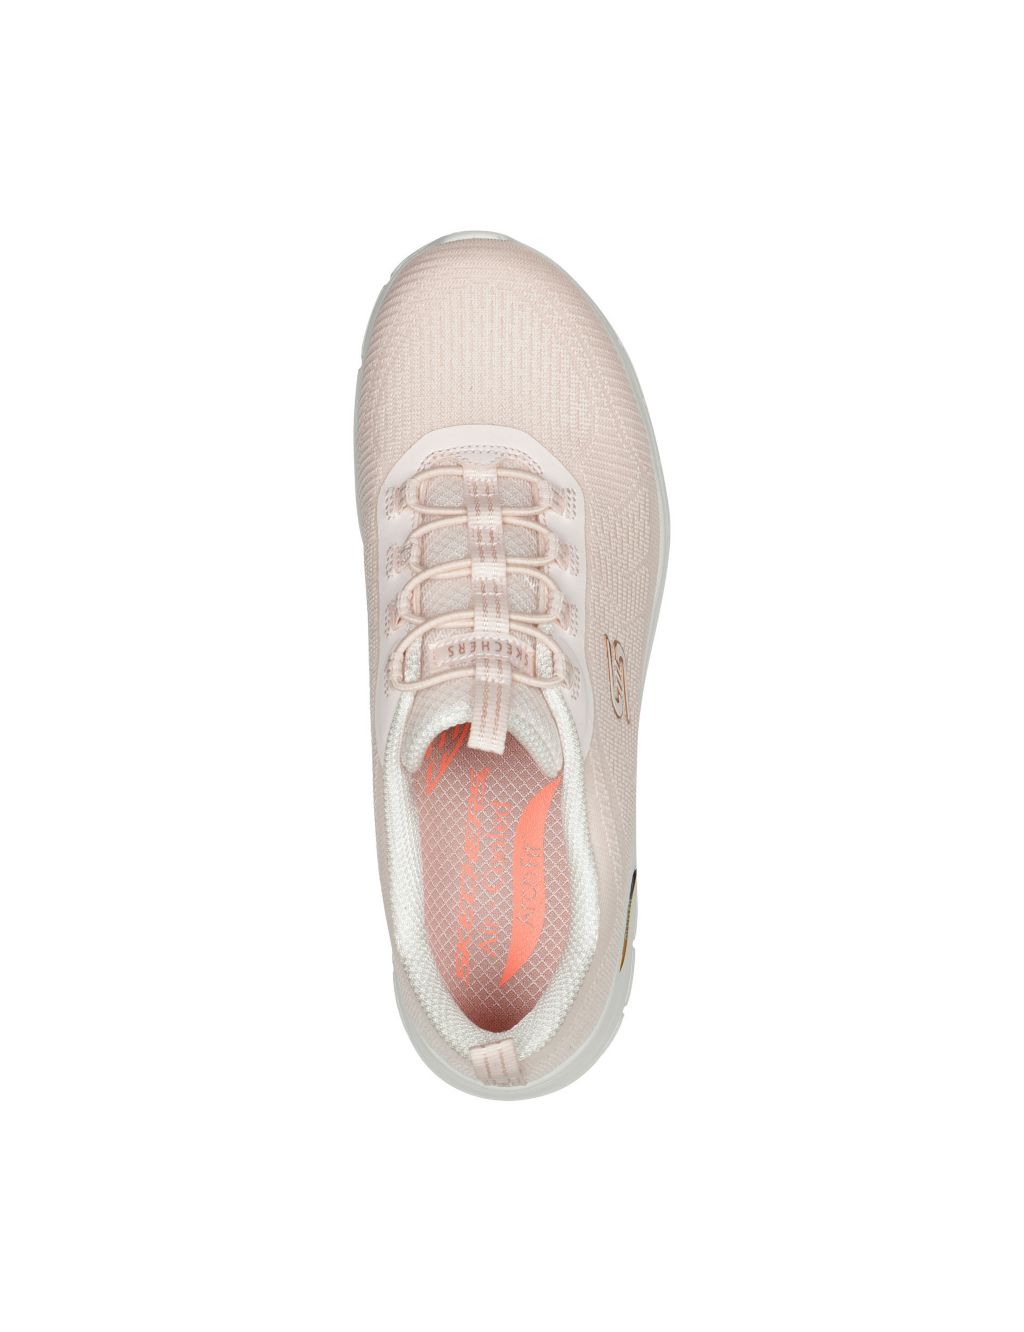 Arch Fit Vista Gleaming Knitted Trainers image 3